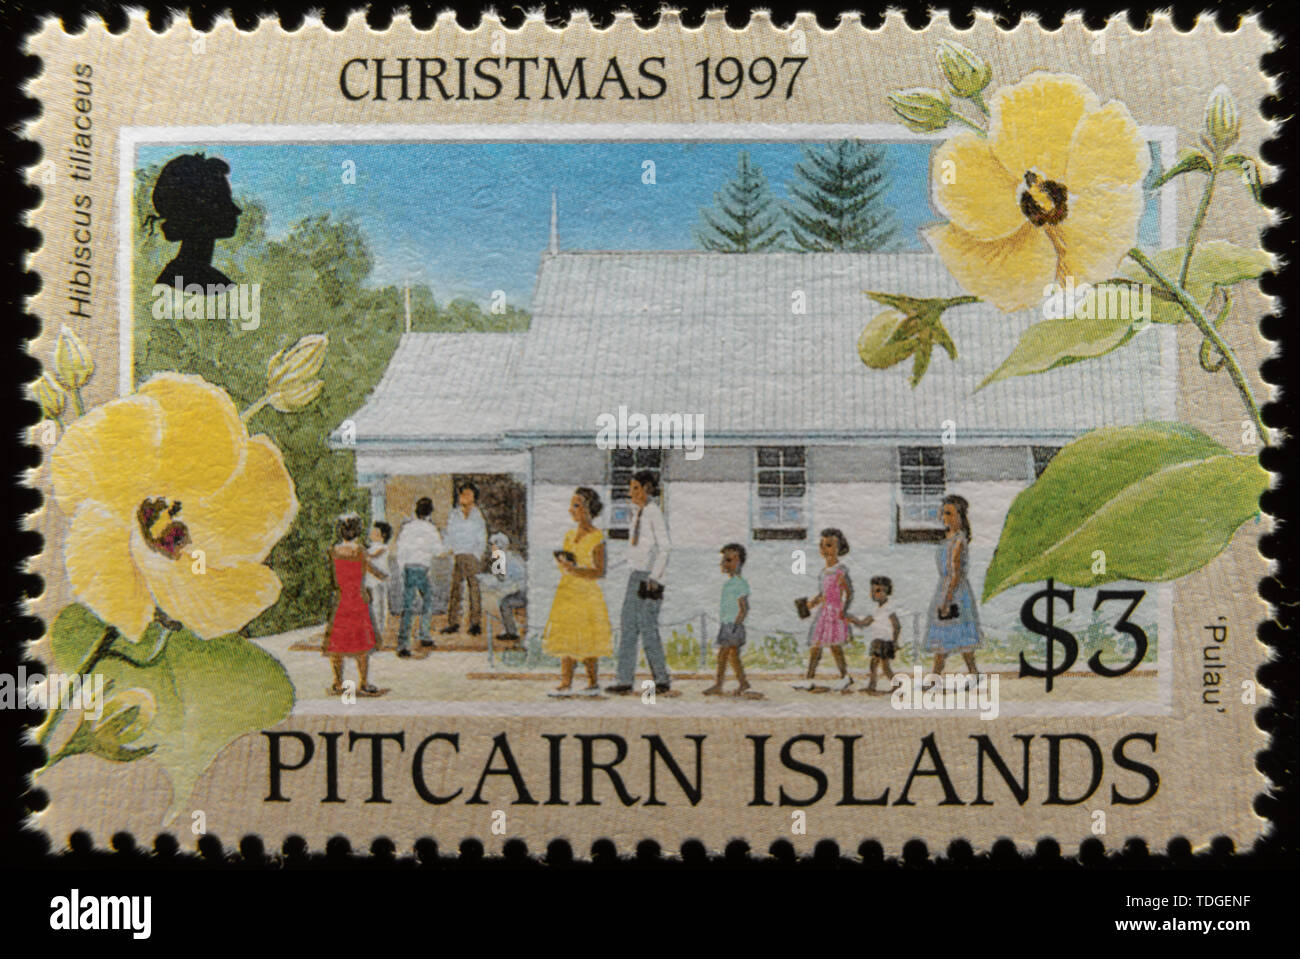 A macro image of a commemorative Pitcairn Islands $3 Christmas 1997 postage stamp. Stock Photo